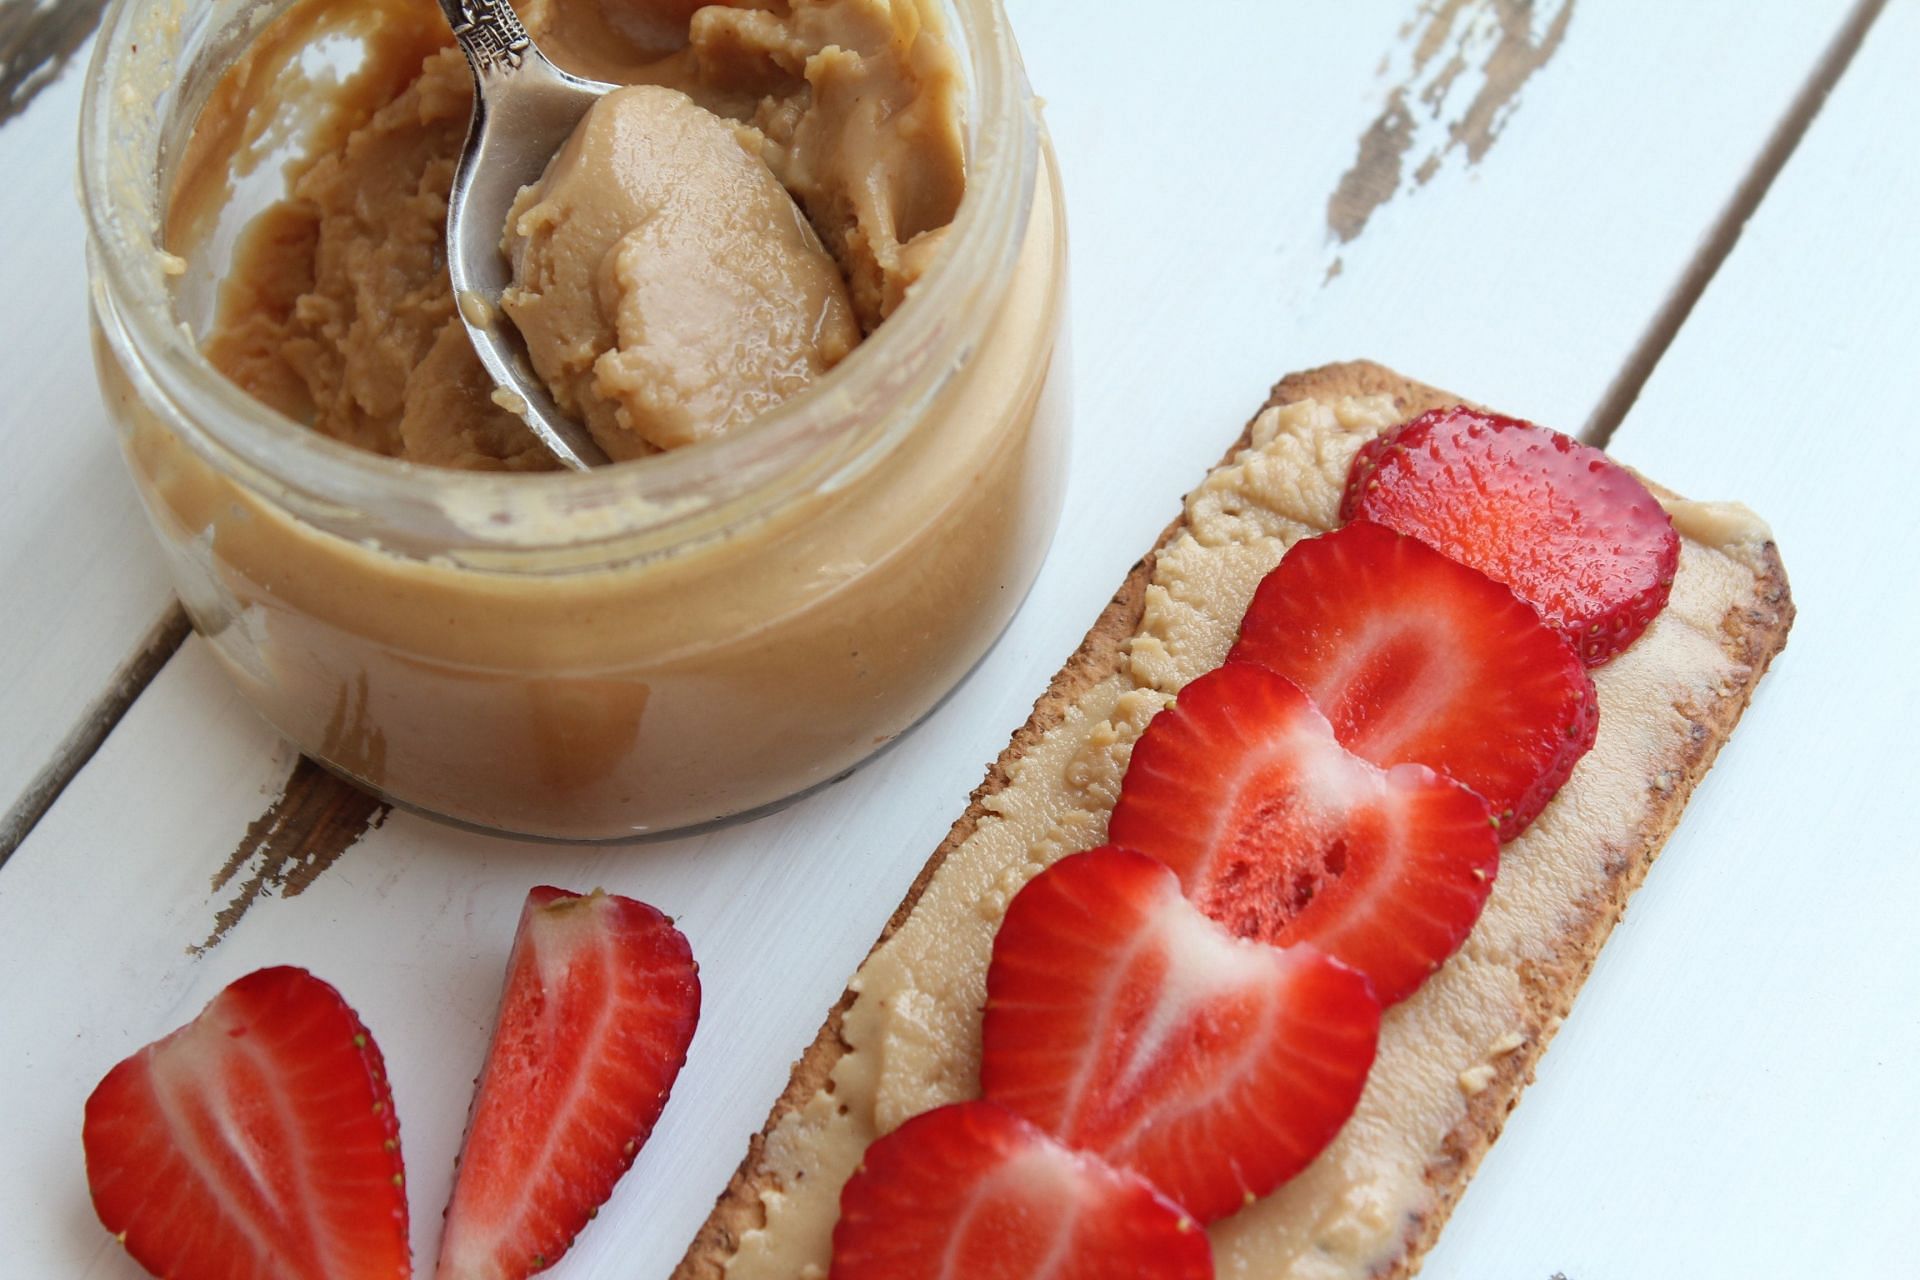 Is peanut butter and jelly healthy? Yes, if you consume with white bread. (Image via Pexels/Pixabay)